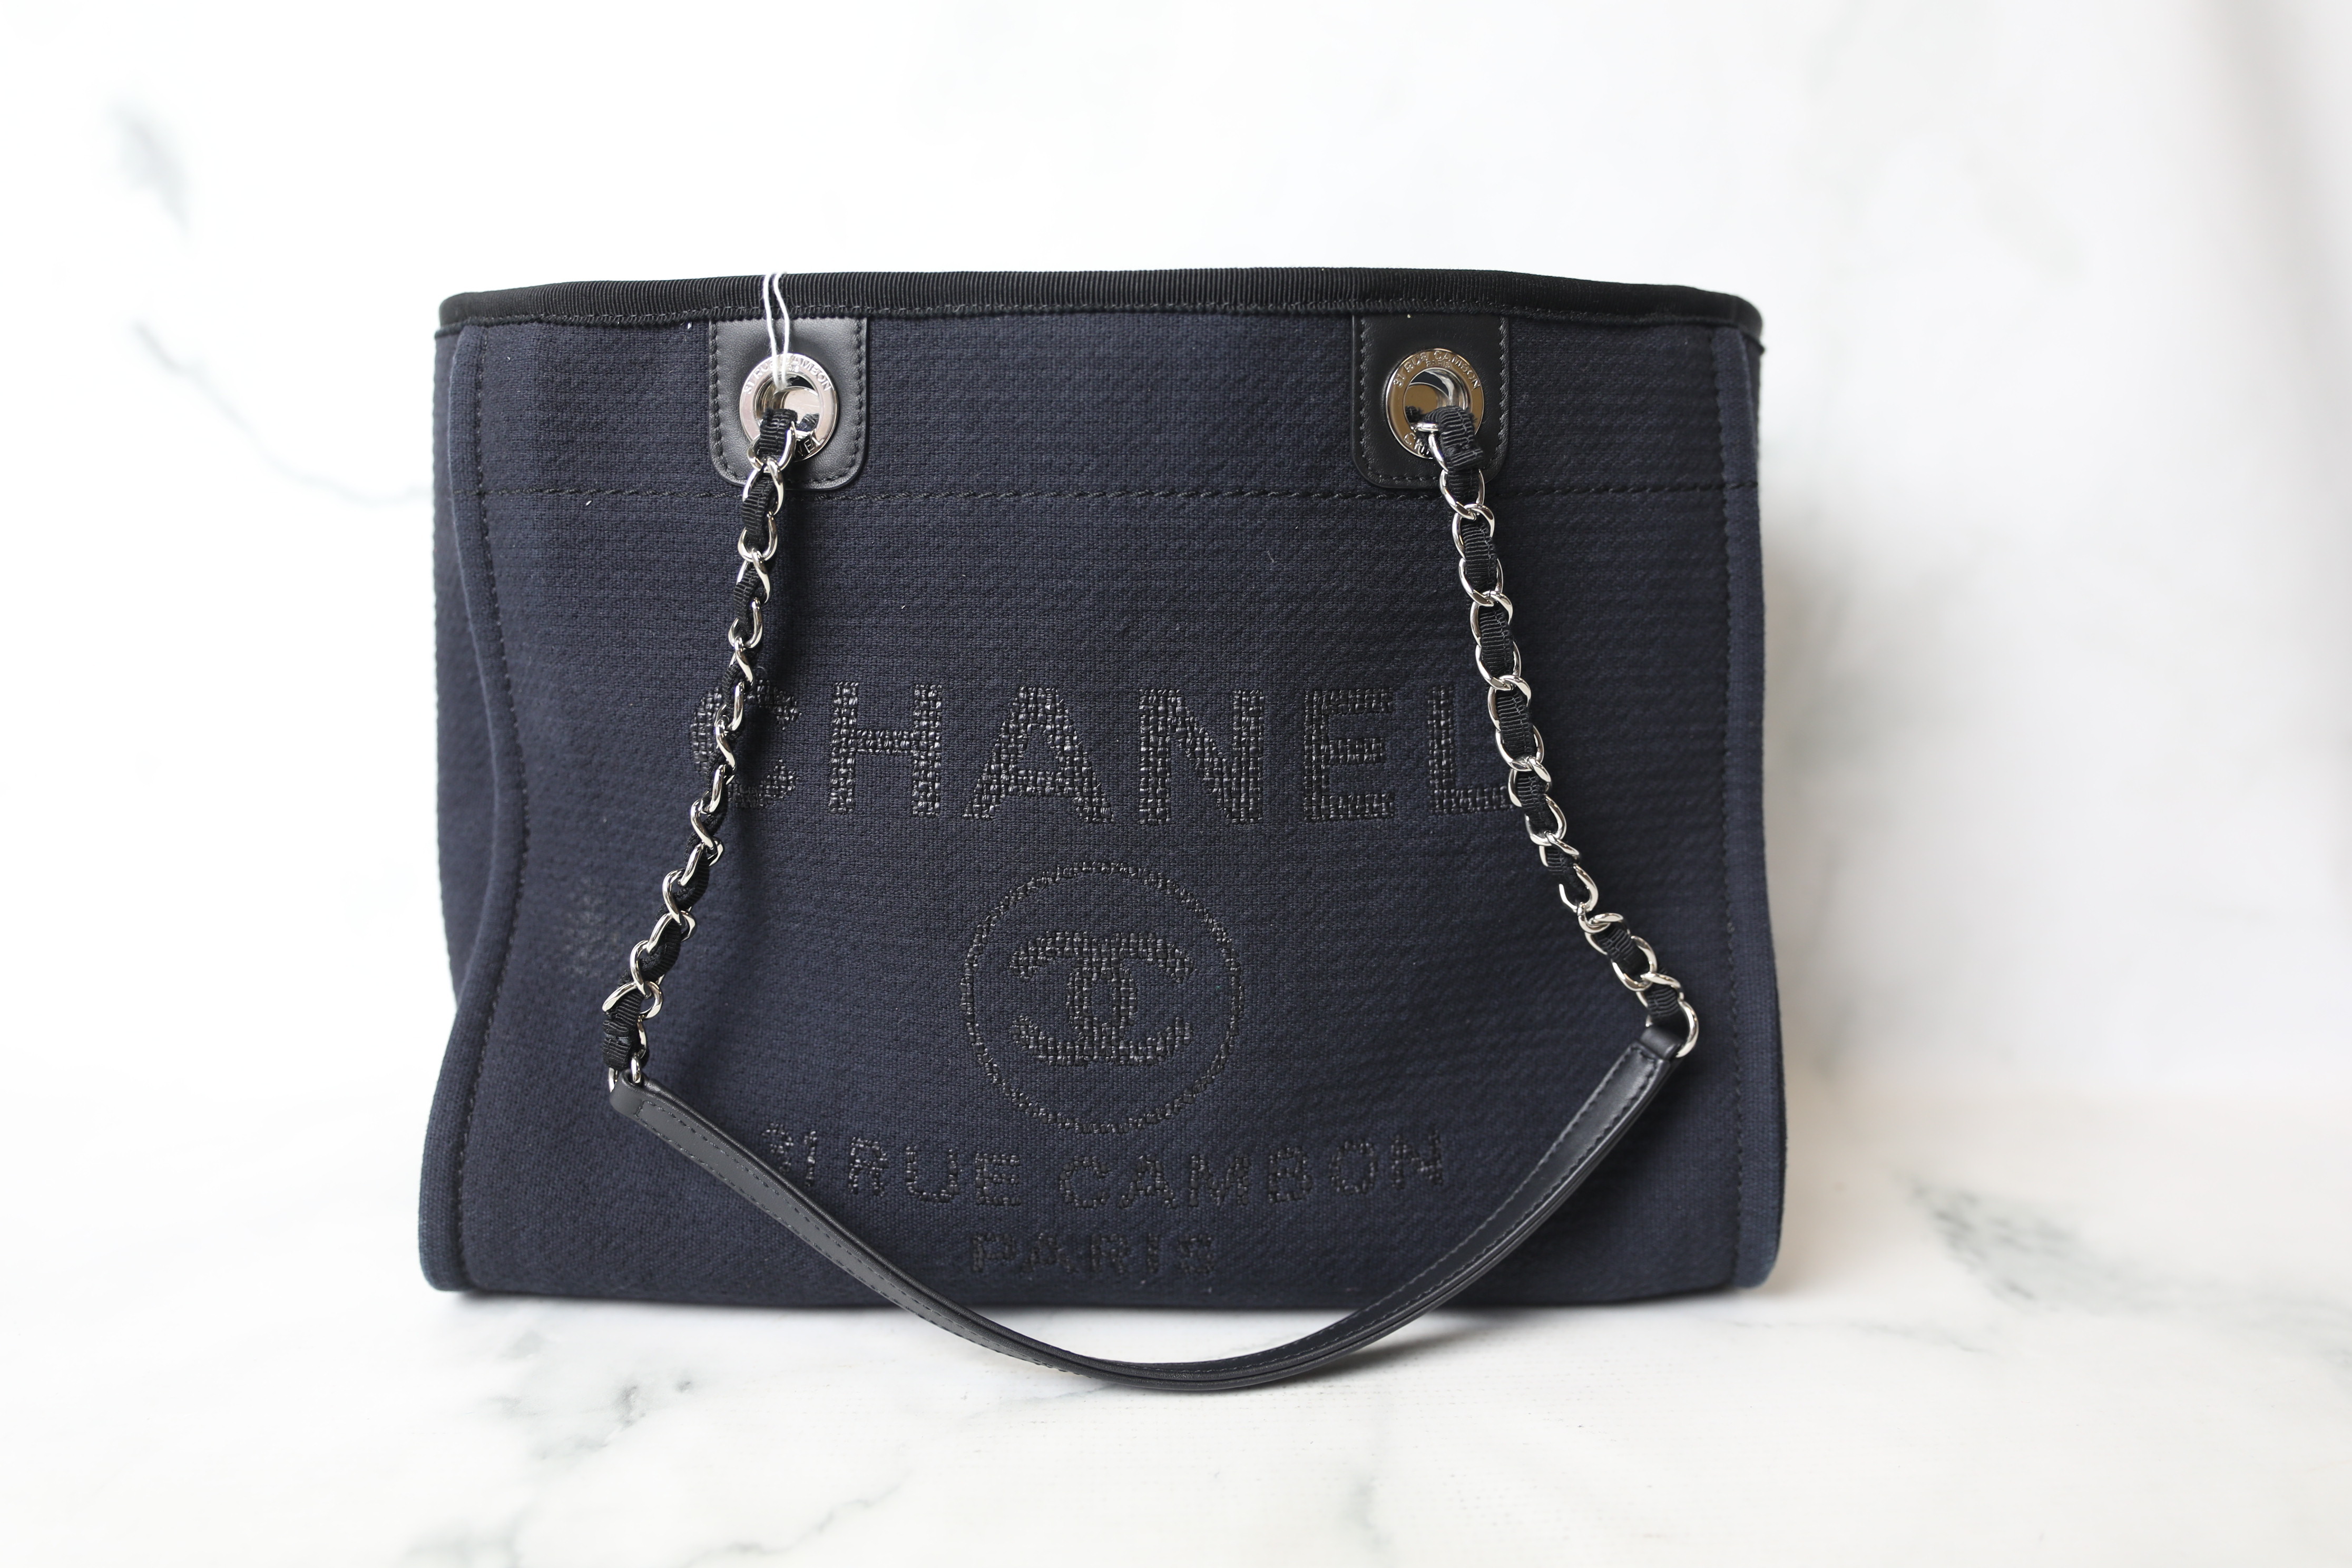 Chanel Deauville Small Canvas Leather Tote Bag Dark Blue